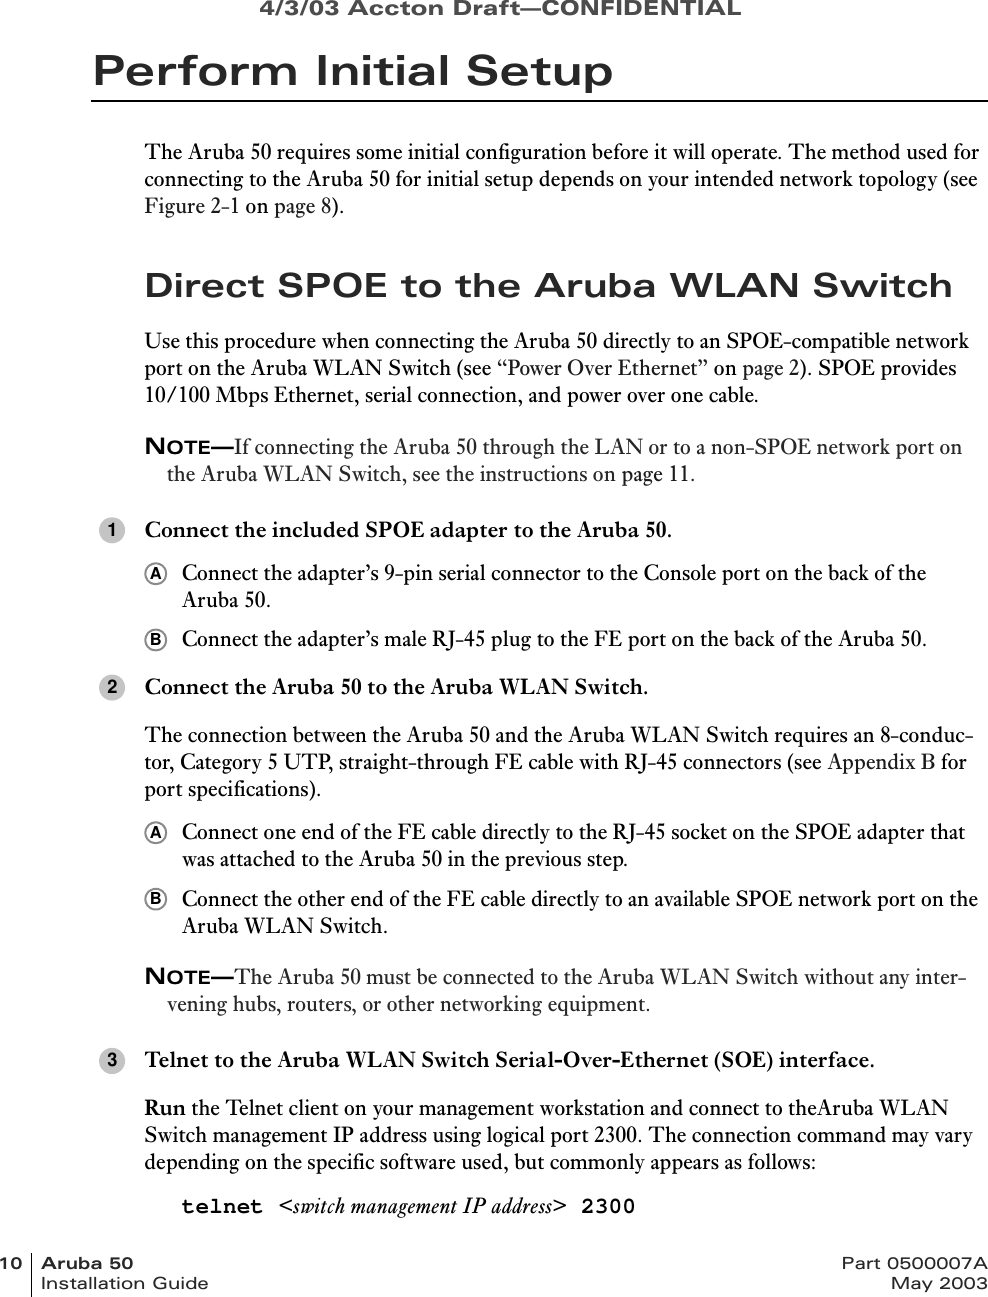 4/3/03 Accton Draft—CONFIDENTIAL10 Aruba 50 Part 0500007AInstallation Guide May 2003Perform Initial SetupThe Aruba 50 requires some initial configuration before it will operate. The method used for connecting to the Aruba 50 for initial setup depends on your intended network topology (see Figure 2-1 on page 8).Direct SPOE to the Aruba WLAN SwitchUse this procedure when connecting the Aruba 50 directly to an SPOE-compatible network port on the Aruba WLAN Switch (see “Power Over Ethernet” on page 2). SPOE provides 10/100 Mbps Ethernet, serial connection, and power over one cable.NOTE—If connecting the Aruba 50 through the LAN or to a non-SPOE network port on the Aruba WLAN Switch, see the instructions on page 11.Connect the included SPOE adapter to the Aruba 50.Connect the adapter’s 9-pin serial connector to the Console port on the back of the Aruba 50.Connect the adapter’s male RJ-45 plug to the FE port on the back of the Aruba 50.Connect the Aruba 50 to the Aruba WLAN Switch.The connection between the Aruba 50 and the Aruba WLAN Switch requires an 8-conduc-tor, Category 5 UTP, straight-through FE cable with RJ-45 connectors (see Appendix B for port specifications).Connect one end of the FE cable directly to the RJ-45 socket on the SPOE adapter that was attached to the Aruba 50 in the previous step.Connect the other end of the FE cable directly to an available SPOE network port on the Aruba WLAN Switch.NOTE—The Aruba 50 must be connected to the Aruba WLAN Switch without any inter-vening hubs, routers, or other networking equipment.Telnet to the Aruba WLAN Switch Serial-Over-Ethernet (SOE) interface.Run the Telnet client on your management workstation and connect to theAruba WLAN Switch management IP address using logical port 2300. The connection command may vary depending on the specific software used, but commonly appears as follows:telnet &lt;switch management IP address&gt; 23001AB2AB3